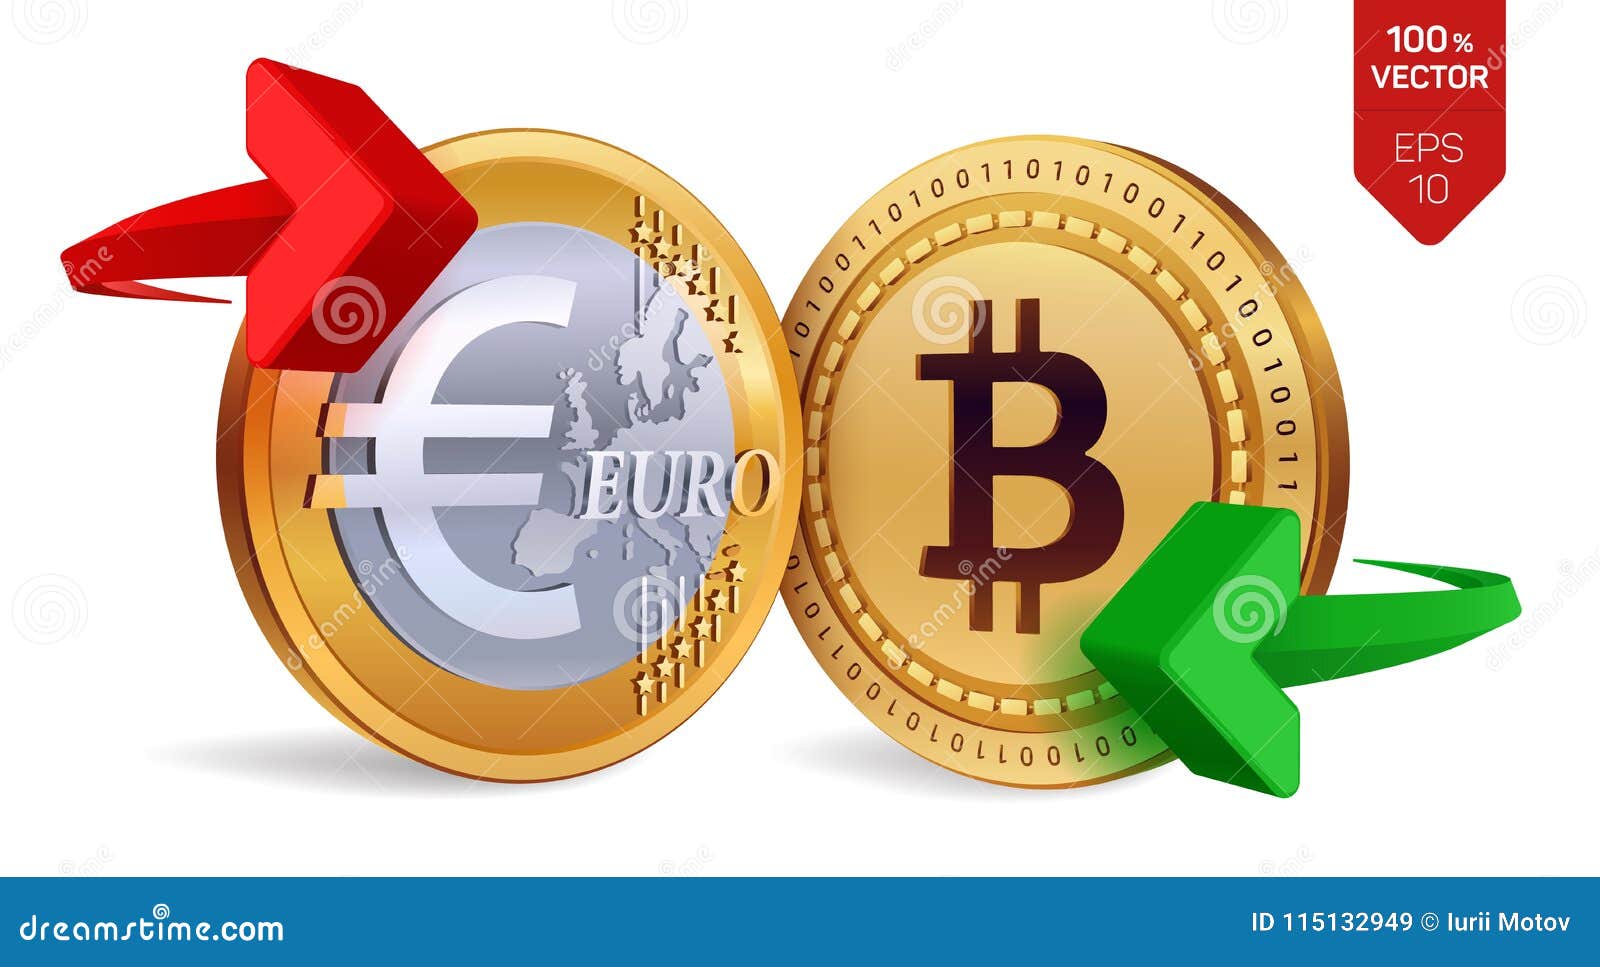 Bitcoin in eurp how much bitcoin can i buy on coinbase